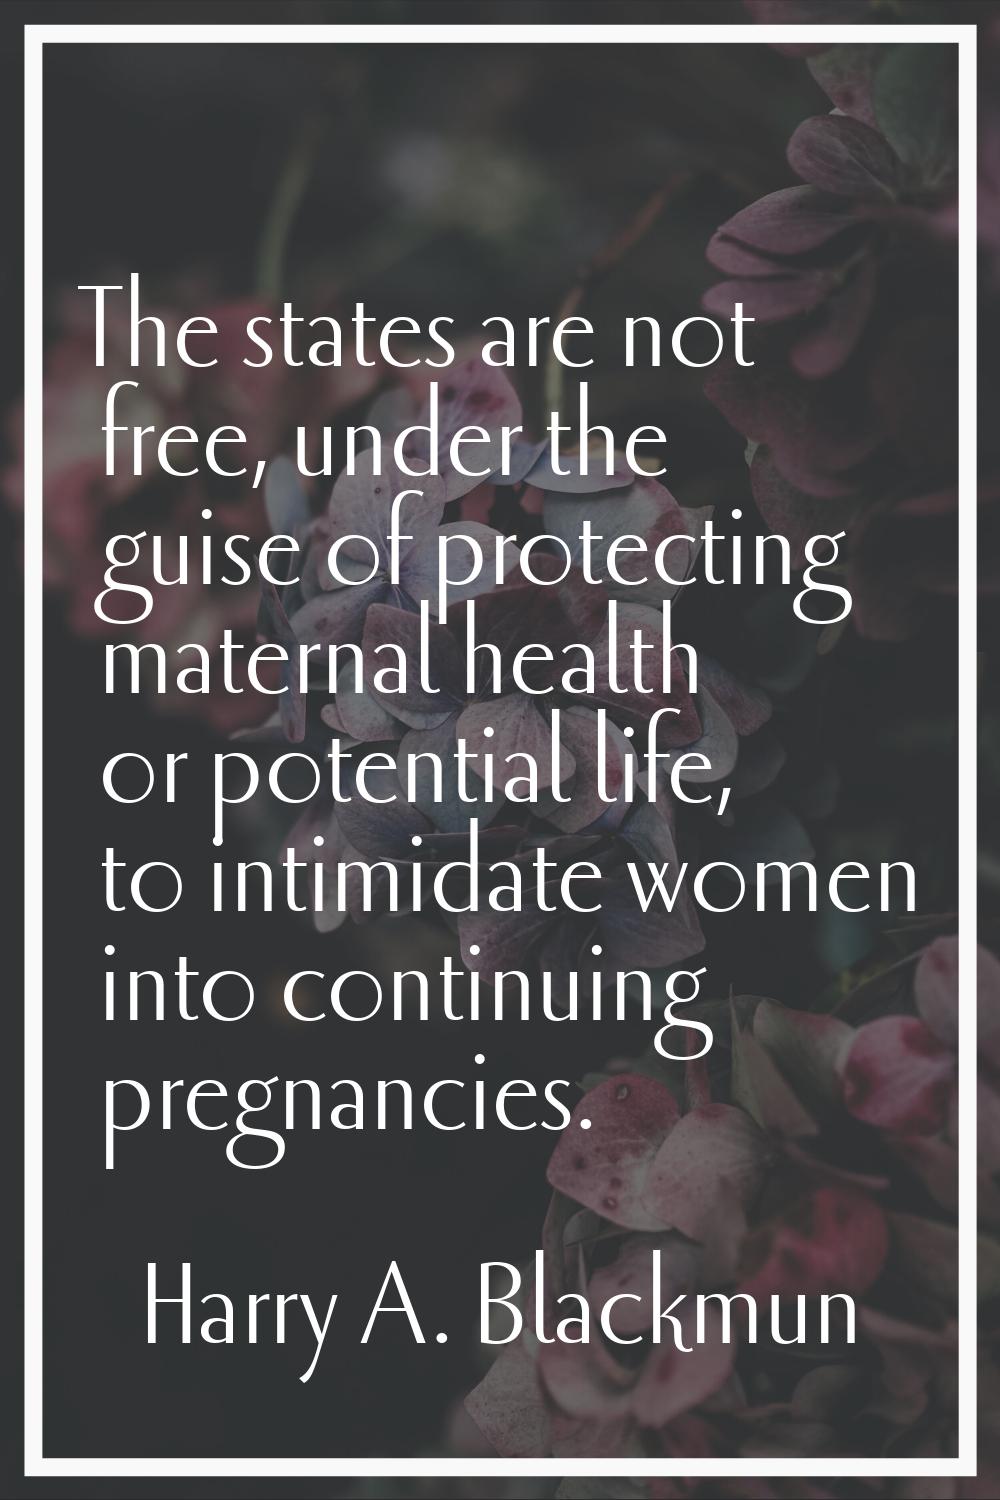 The states are not free, under the guise of protecting maternal health or potential life, to intimi